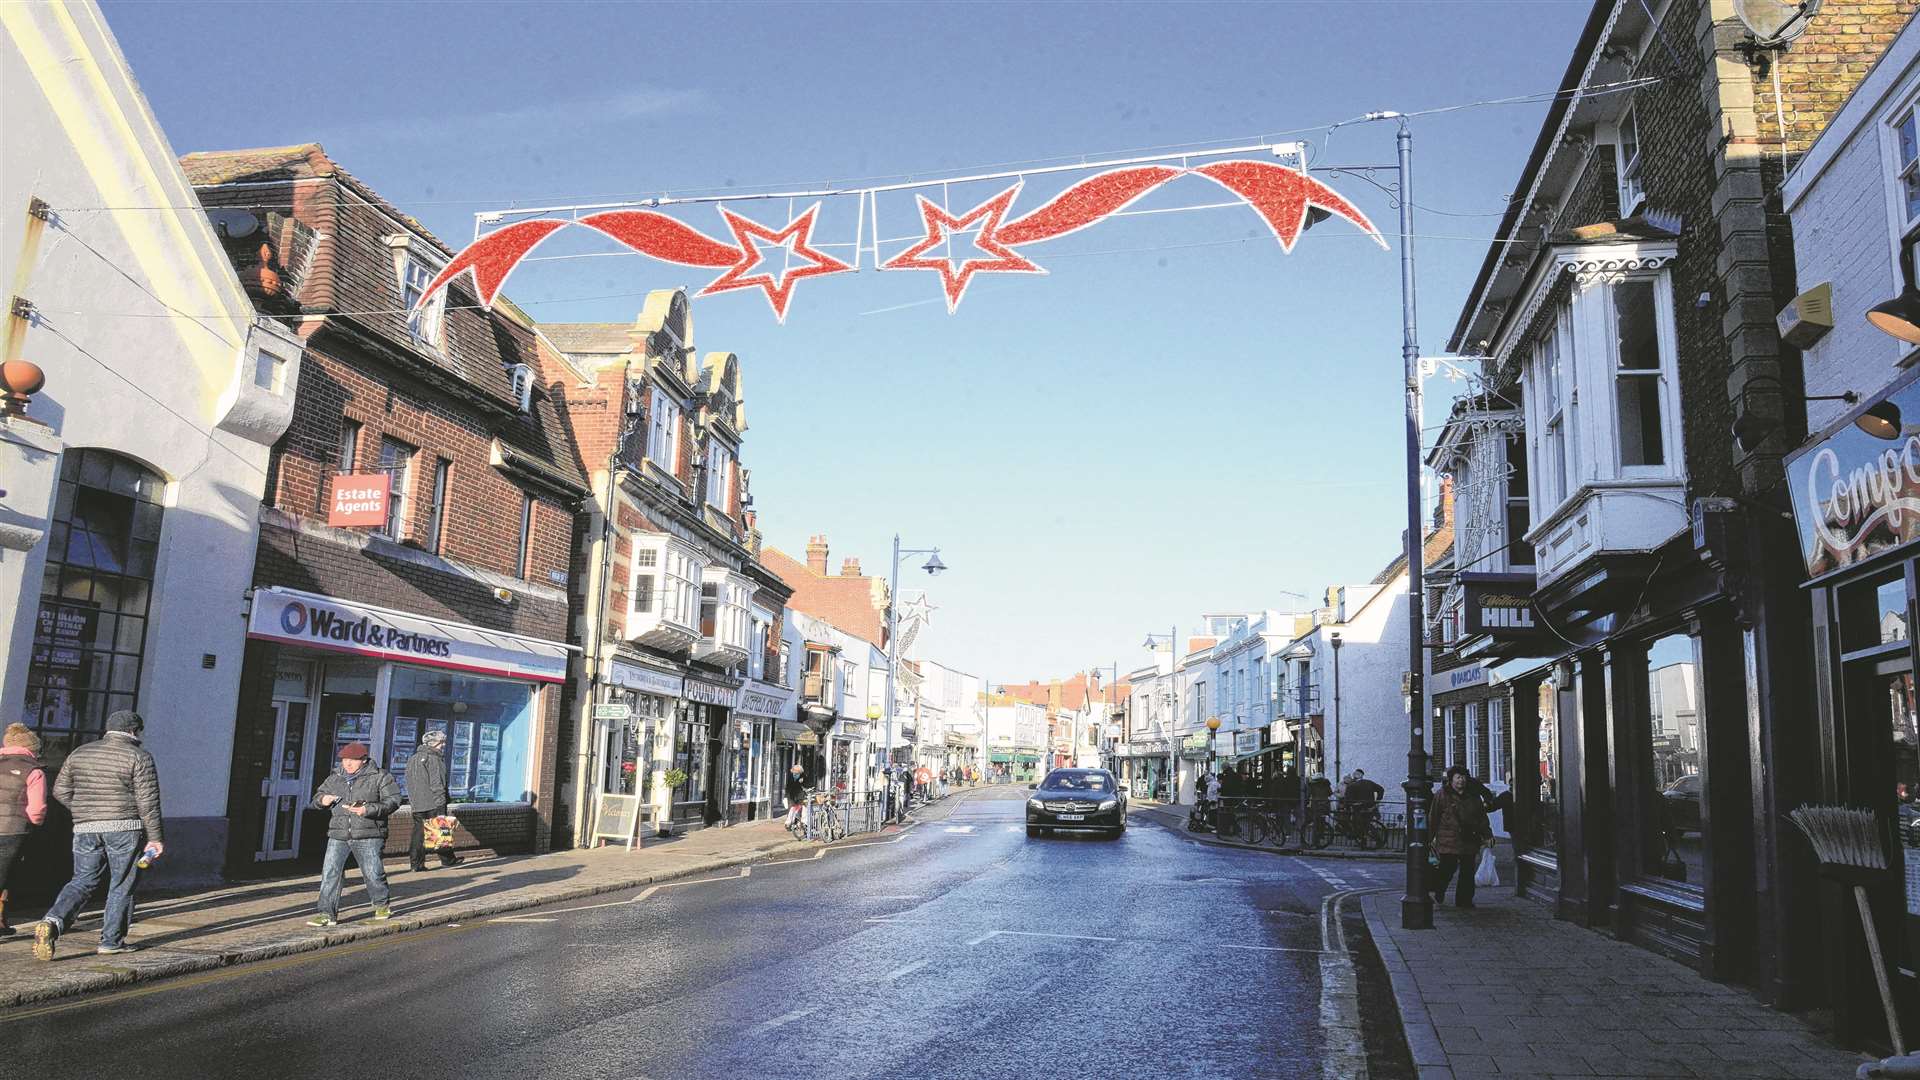 Whitstable High Street is suffering from a lack of trade